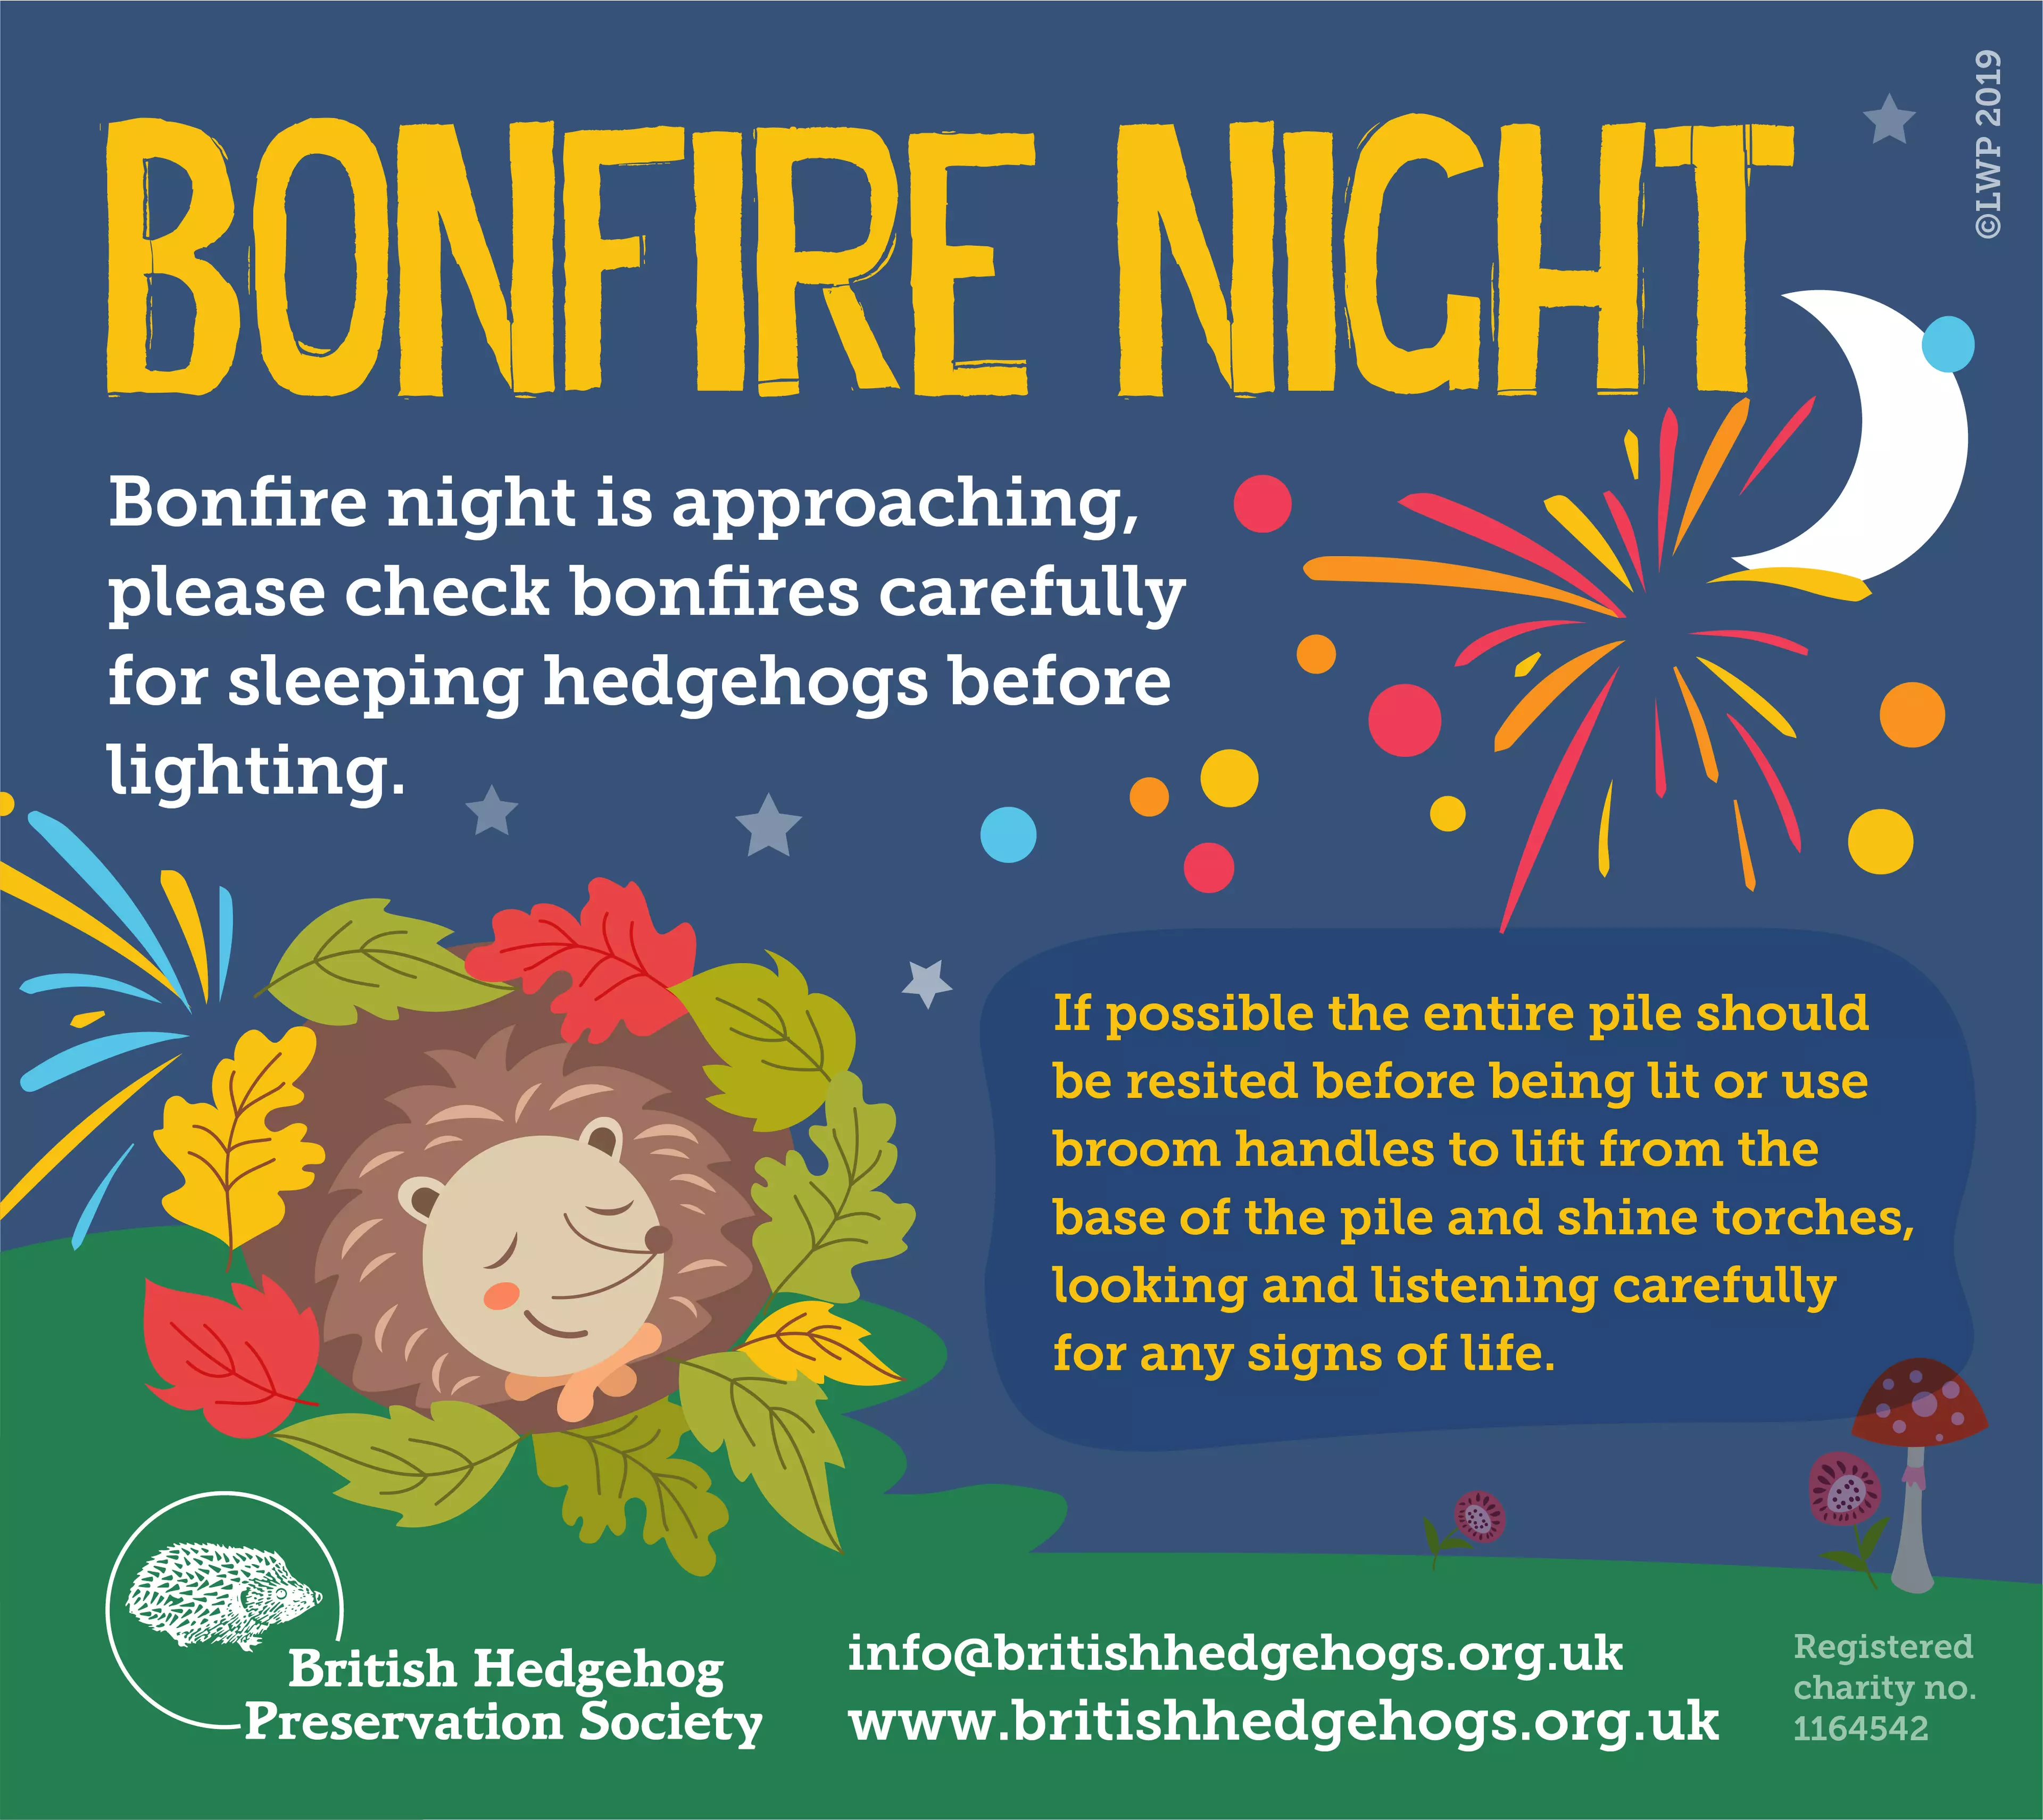 BHPS have shared on how to hedgehog-proof your fire this weekend (